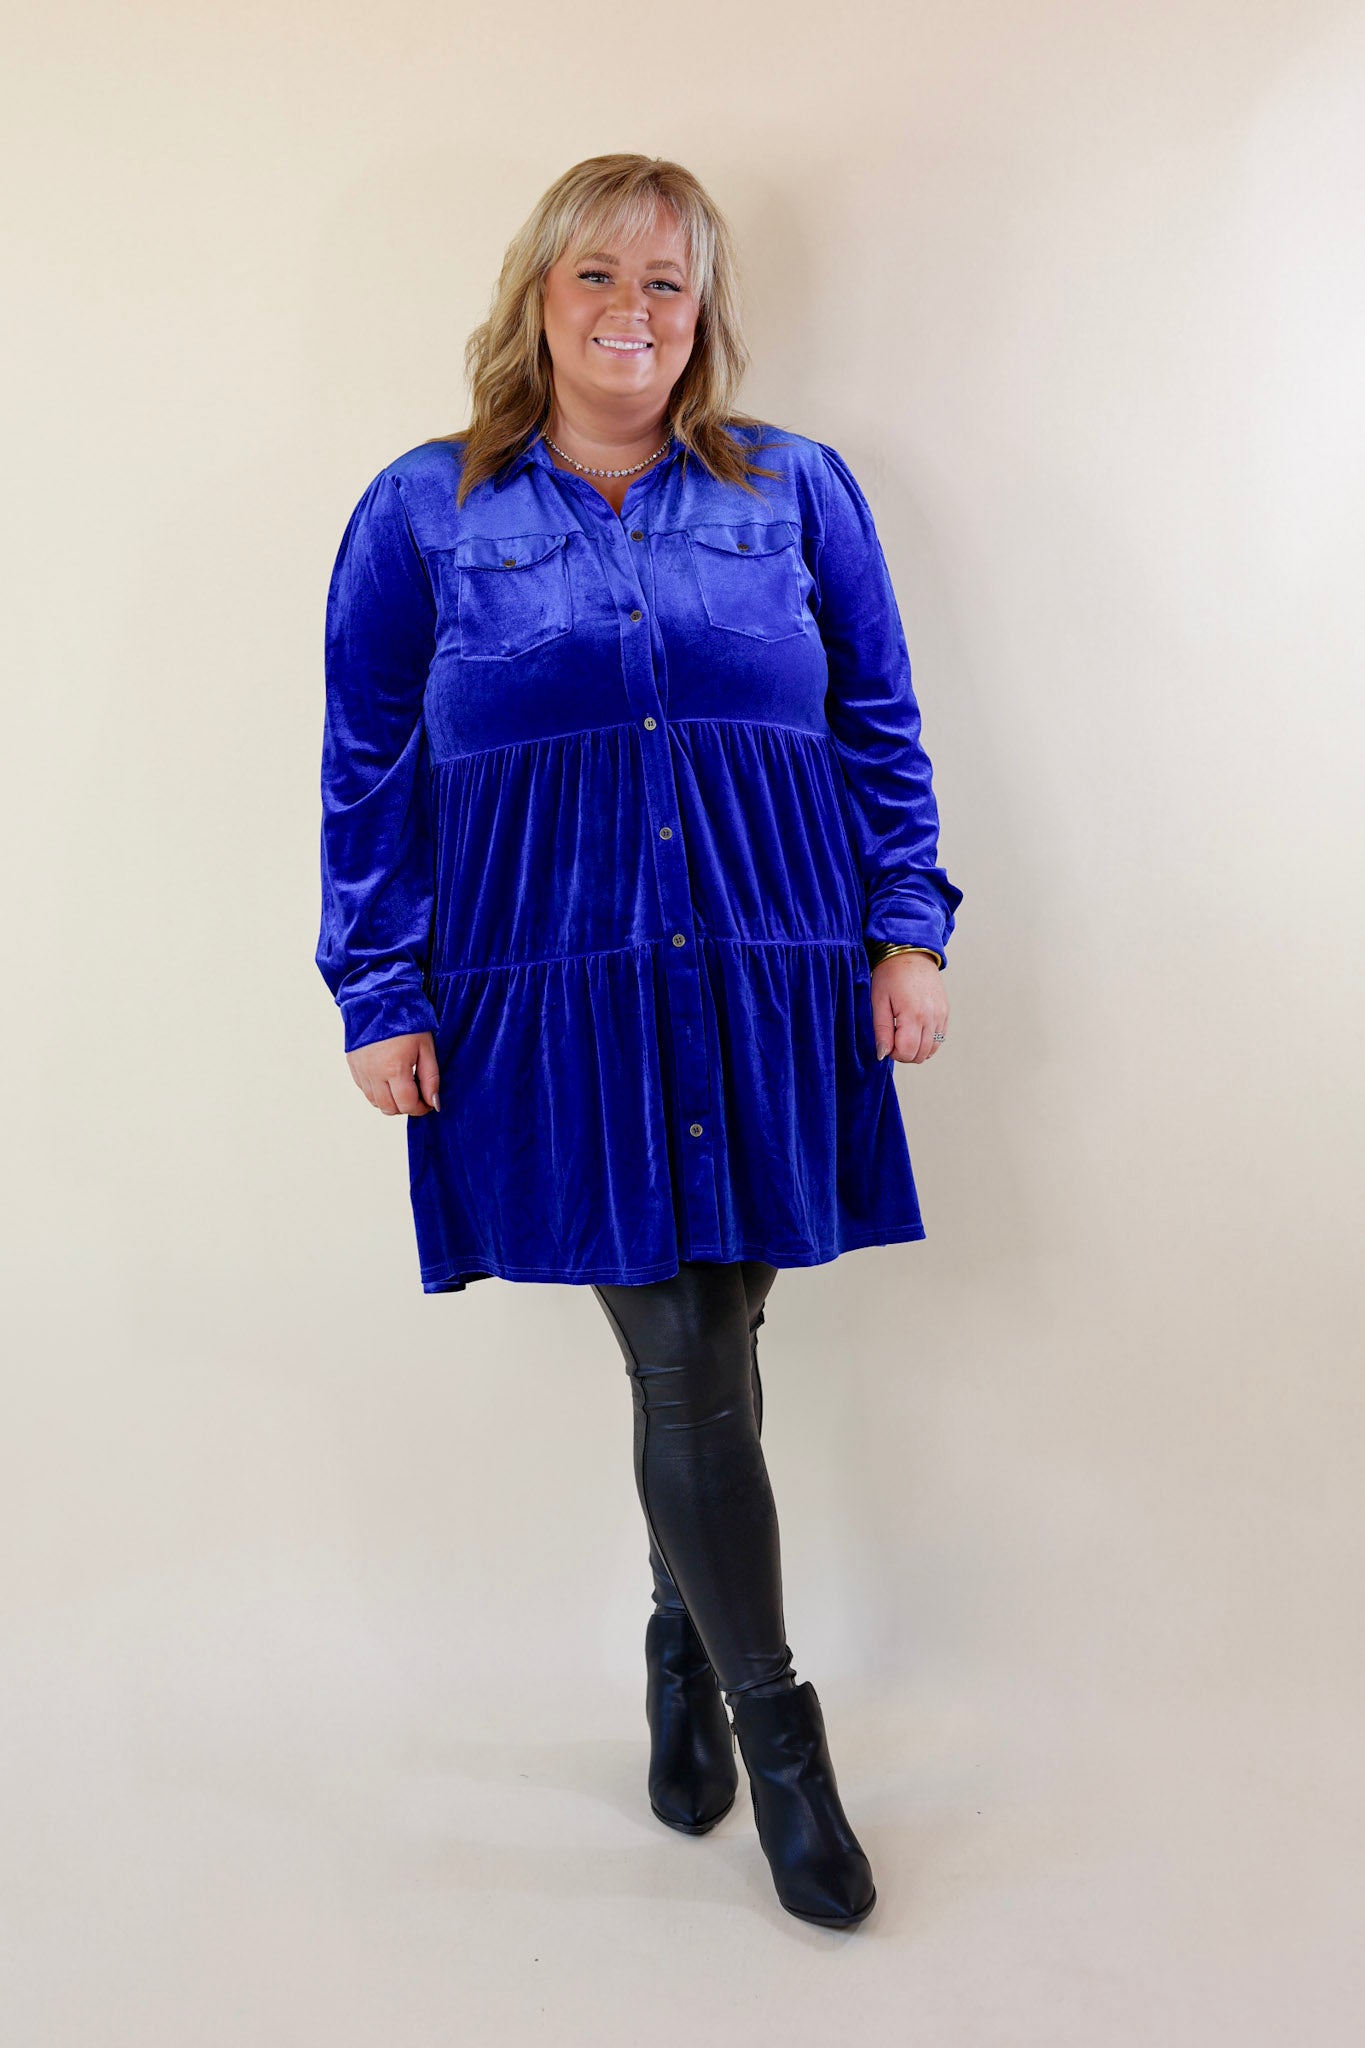 Grateful Gathering Velvet Button Up Dress with Long Sleeves in Royal Blue - Giddy Up Glamour Boutique